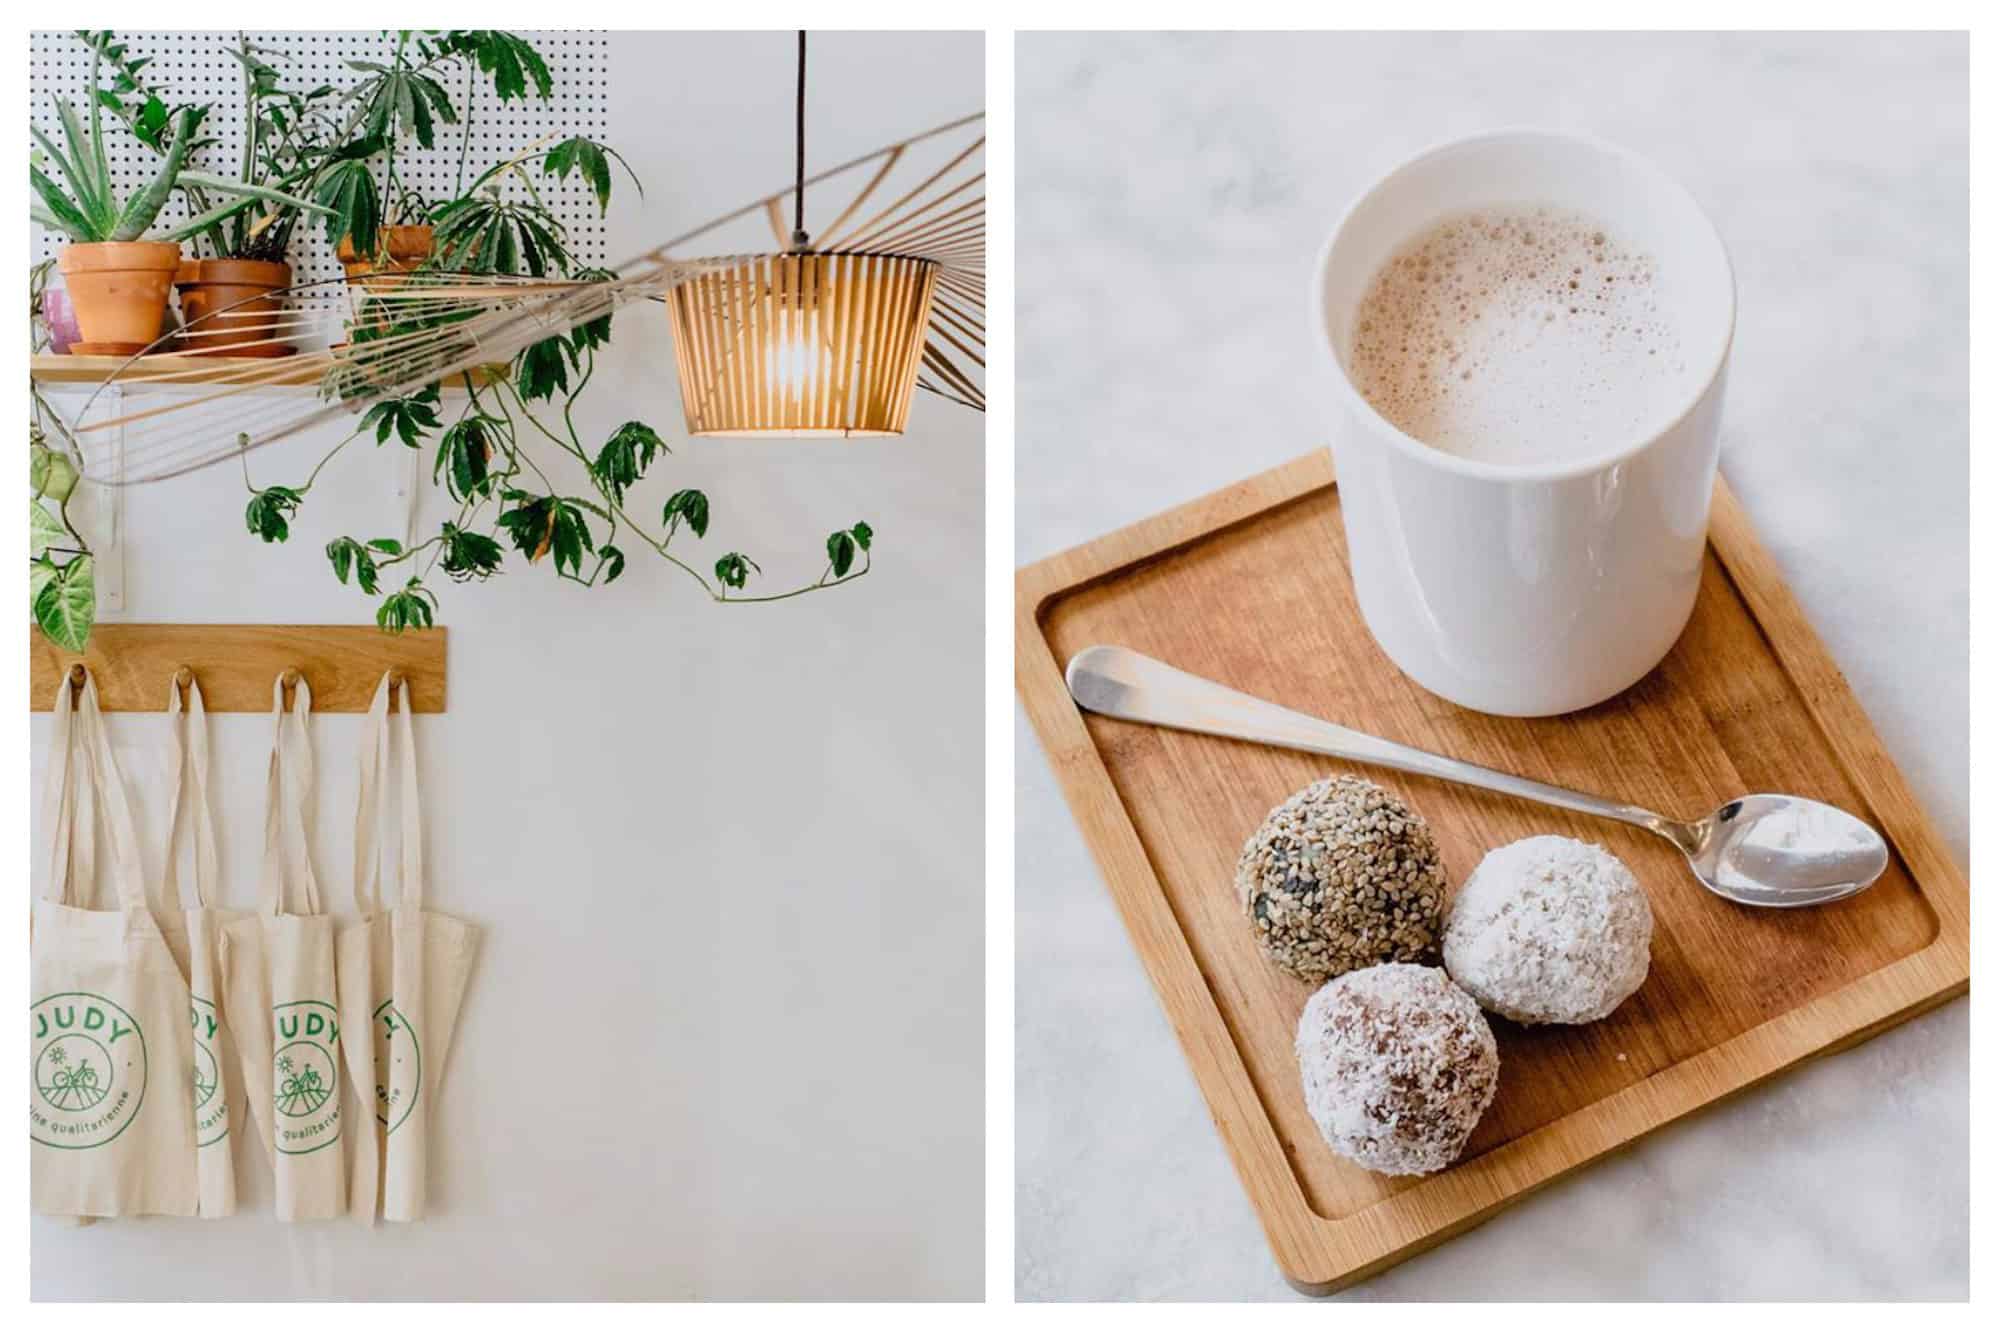 The natural style interiors of Judy coffee shop (left) and a hot drink with coconut dessert balls (right) in Paris' Saint Germain neighborhood